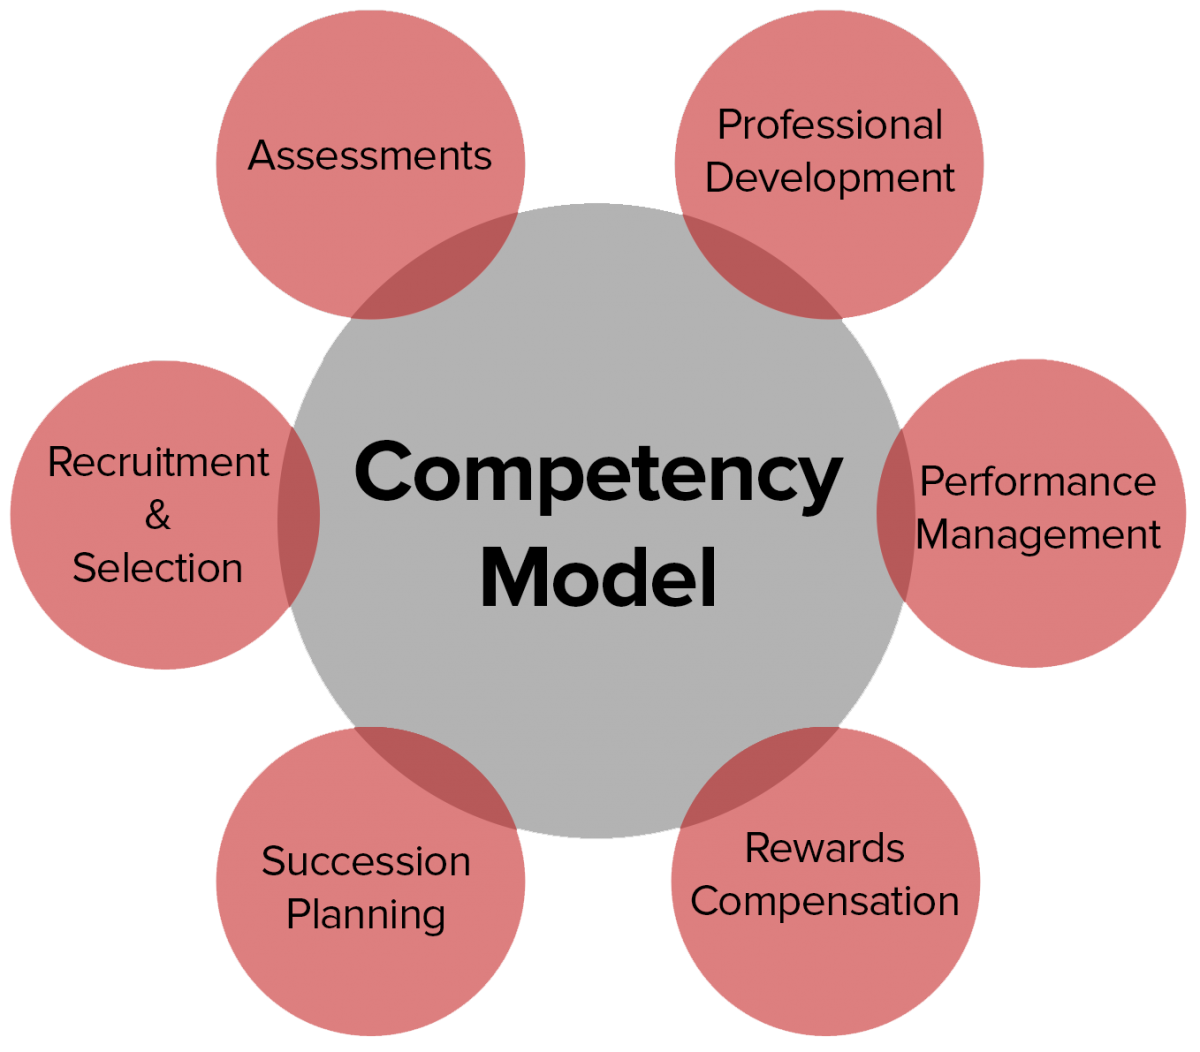 Competency Model image